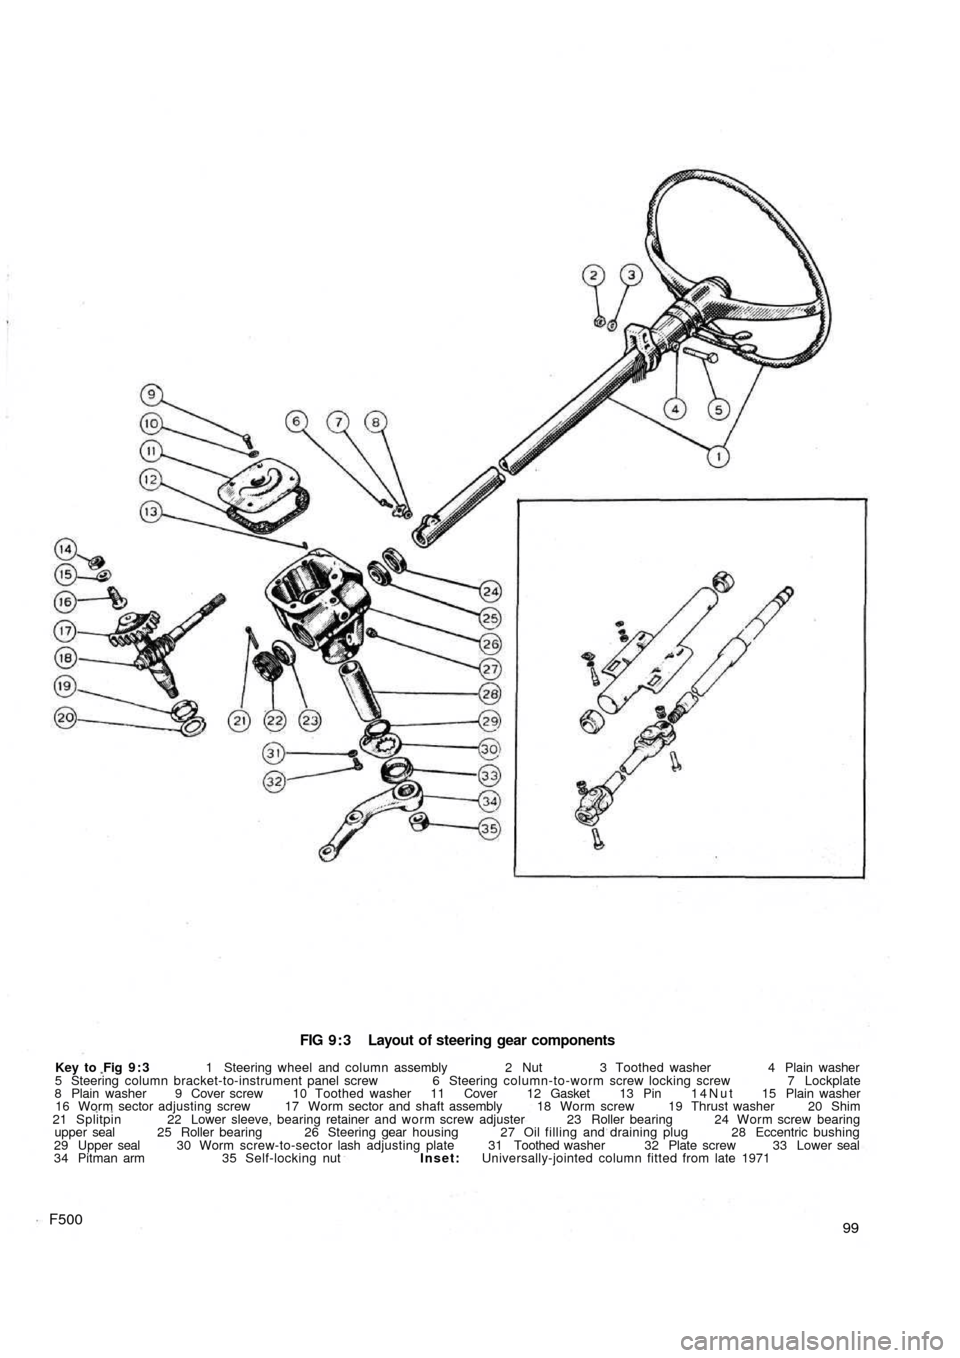 FIAT 500 1966 1.G Workshop Manual FIG 9 : 3  Layout of steering gear components
Key to  Fig 9 : 3 1 Steering wheel and column assembly 2 Nut 3 Toothed washer 4 Plain washer
5 Steering column bracket-to-instrument panel screw 6 Steerin